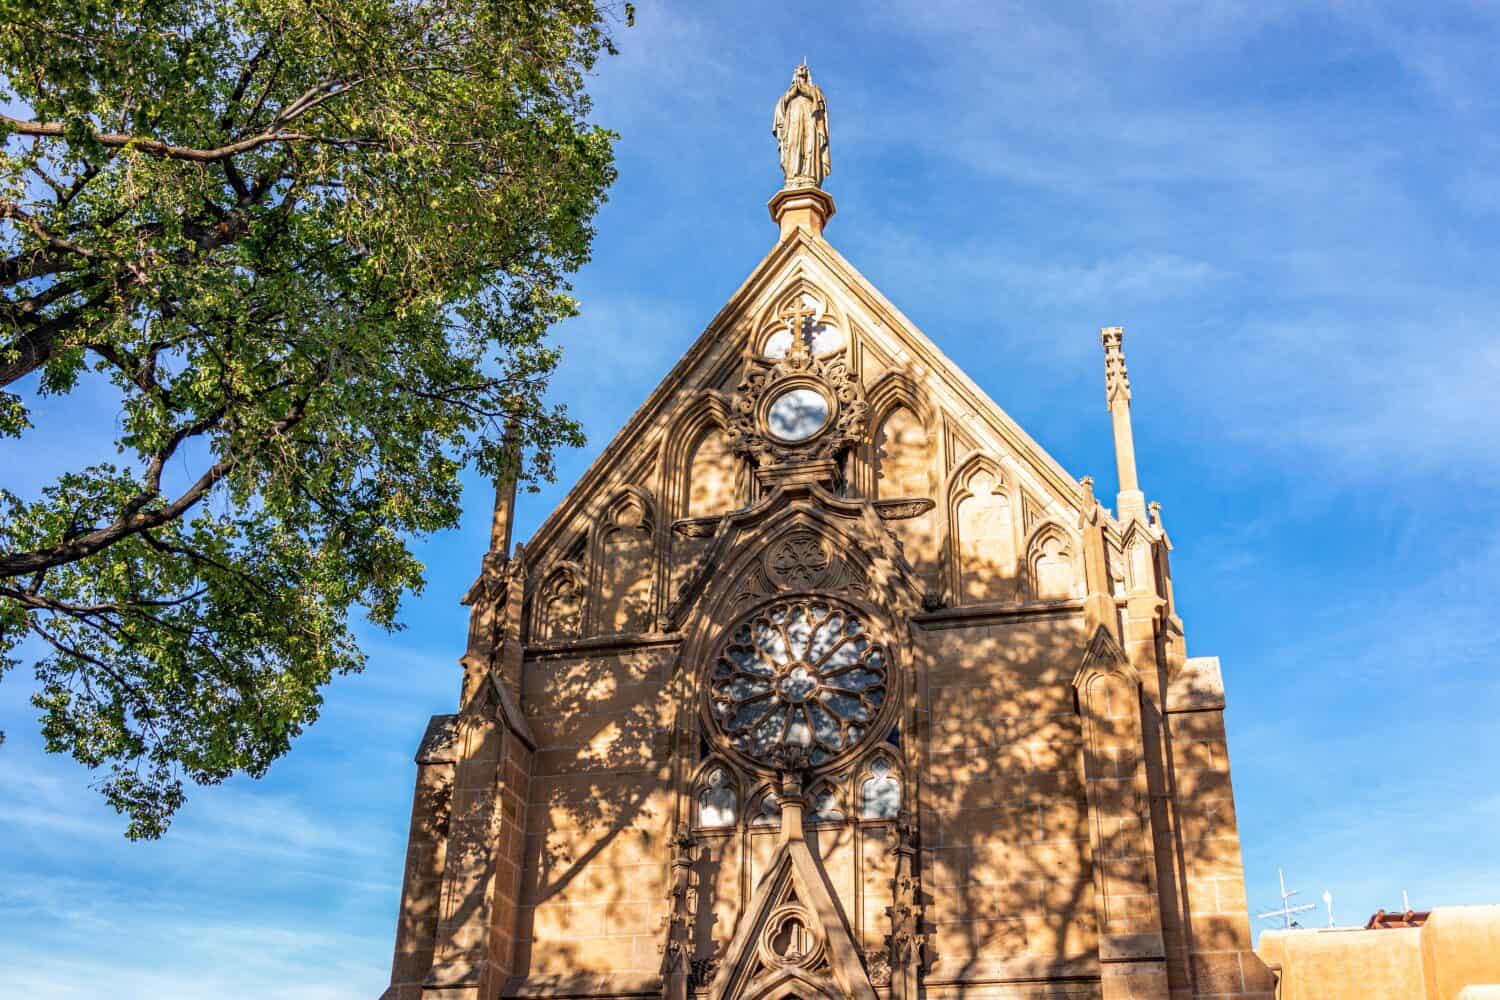 The Loretto Chapel historic old church in Santa Fe, New Mexico in United States with closeup of exterior facade and tree shadow on sunny day against blue sky with nobody